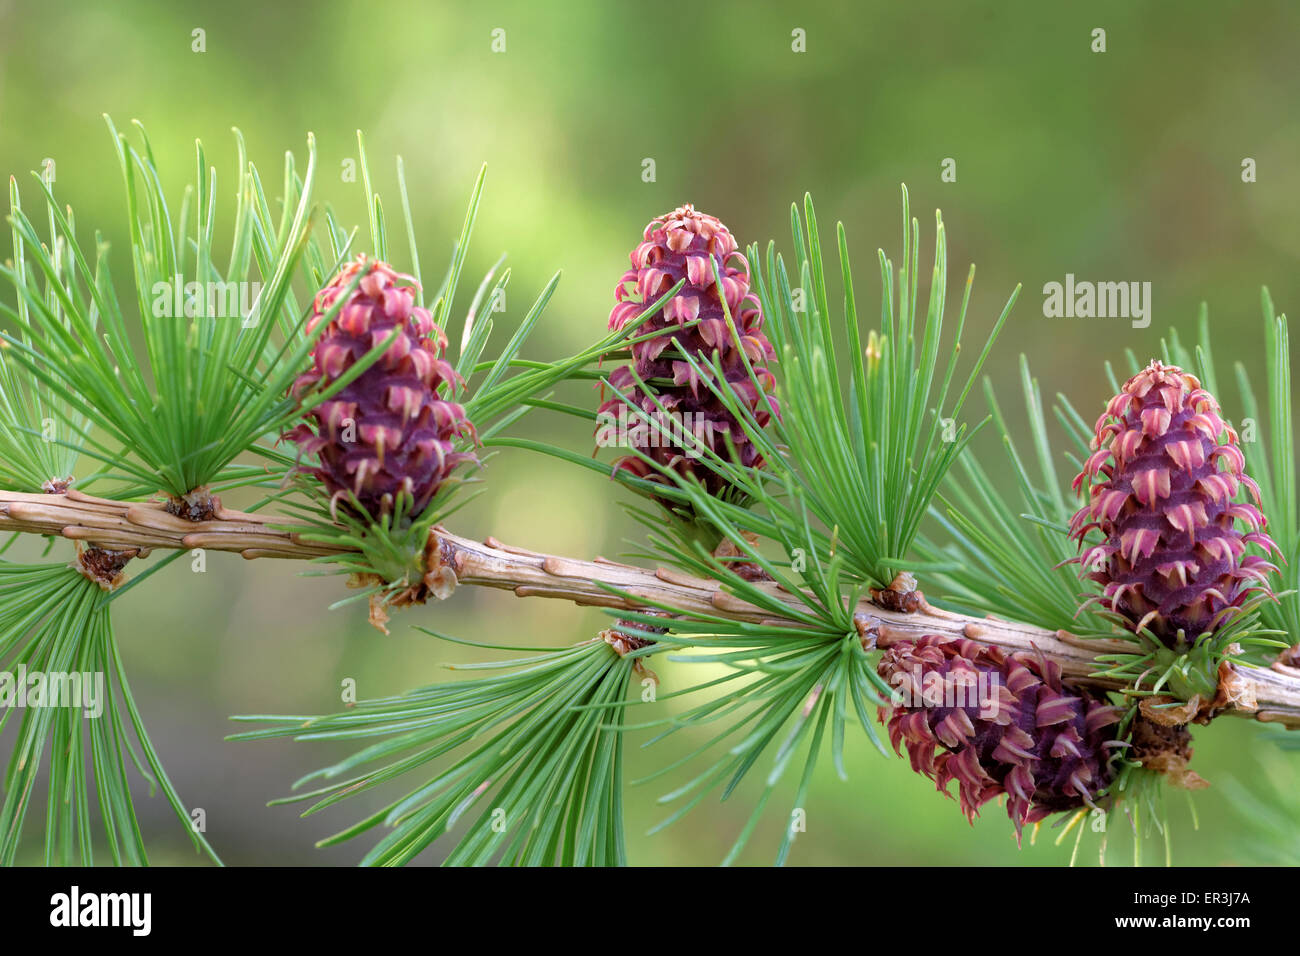 Ovulate cones (strobiles) of larch tree, spring, end of May Stock Photo